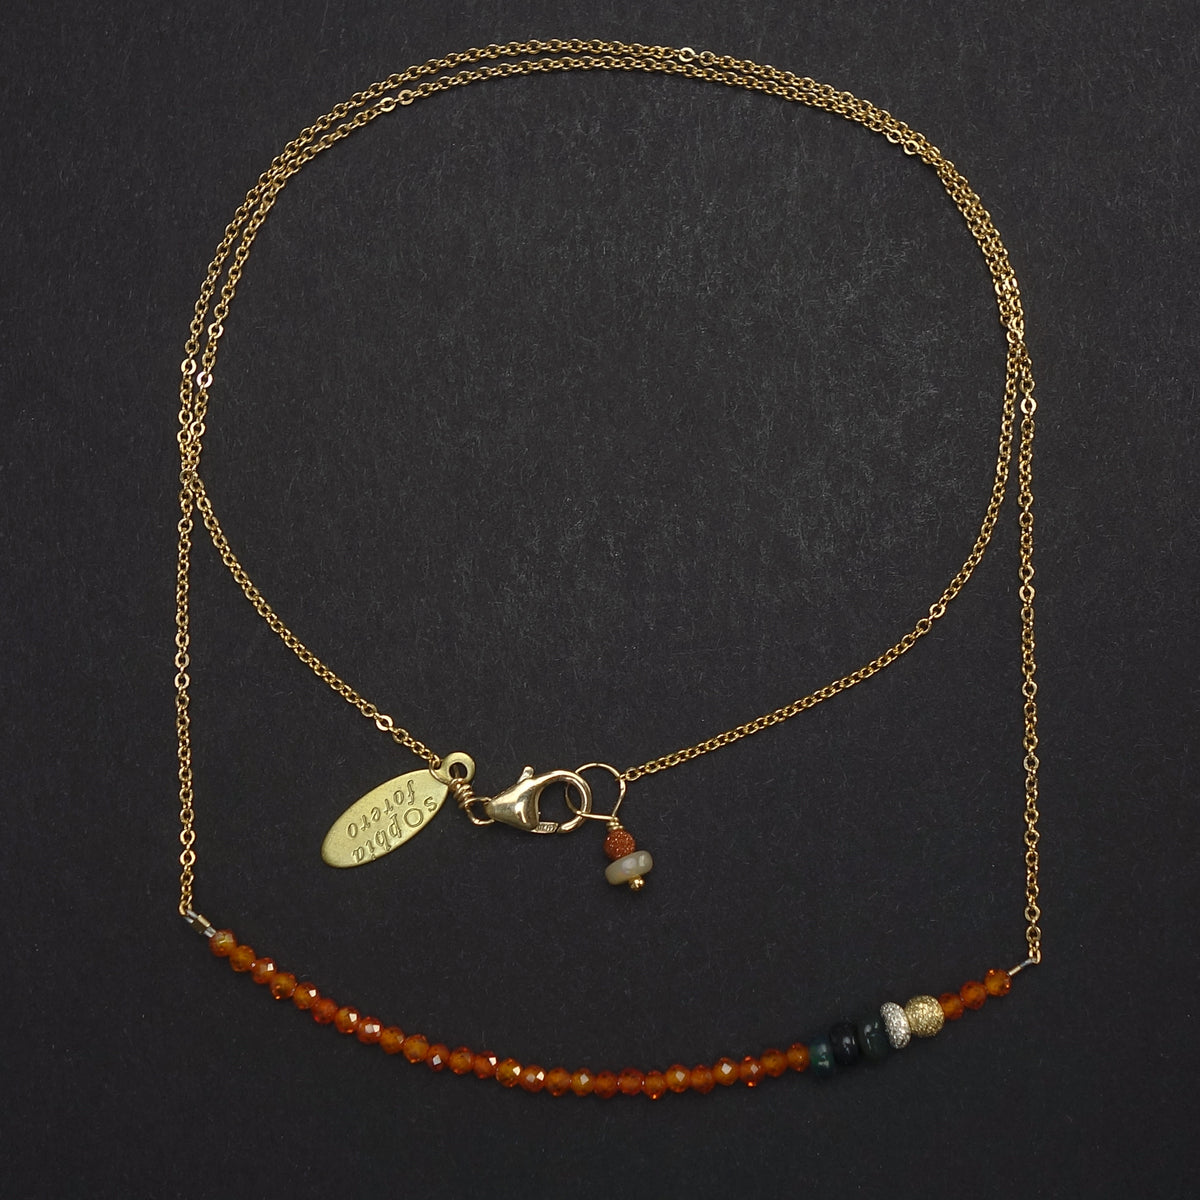 Faceted carnelian and black opal bar necklace